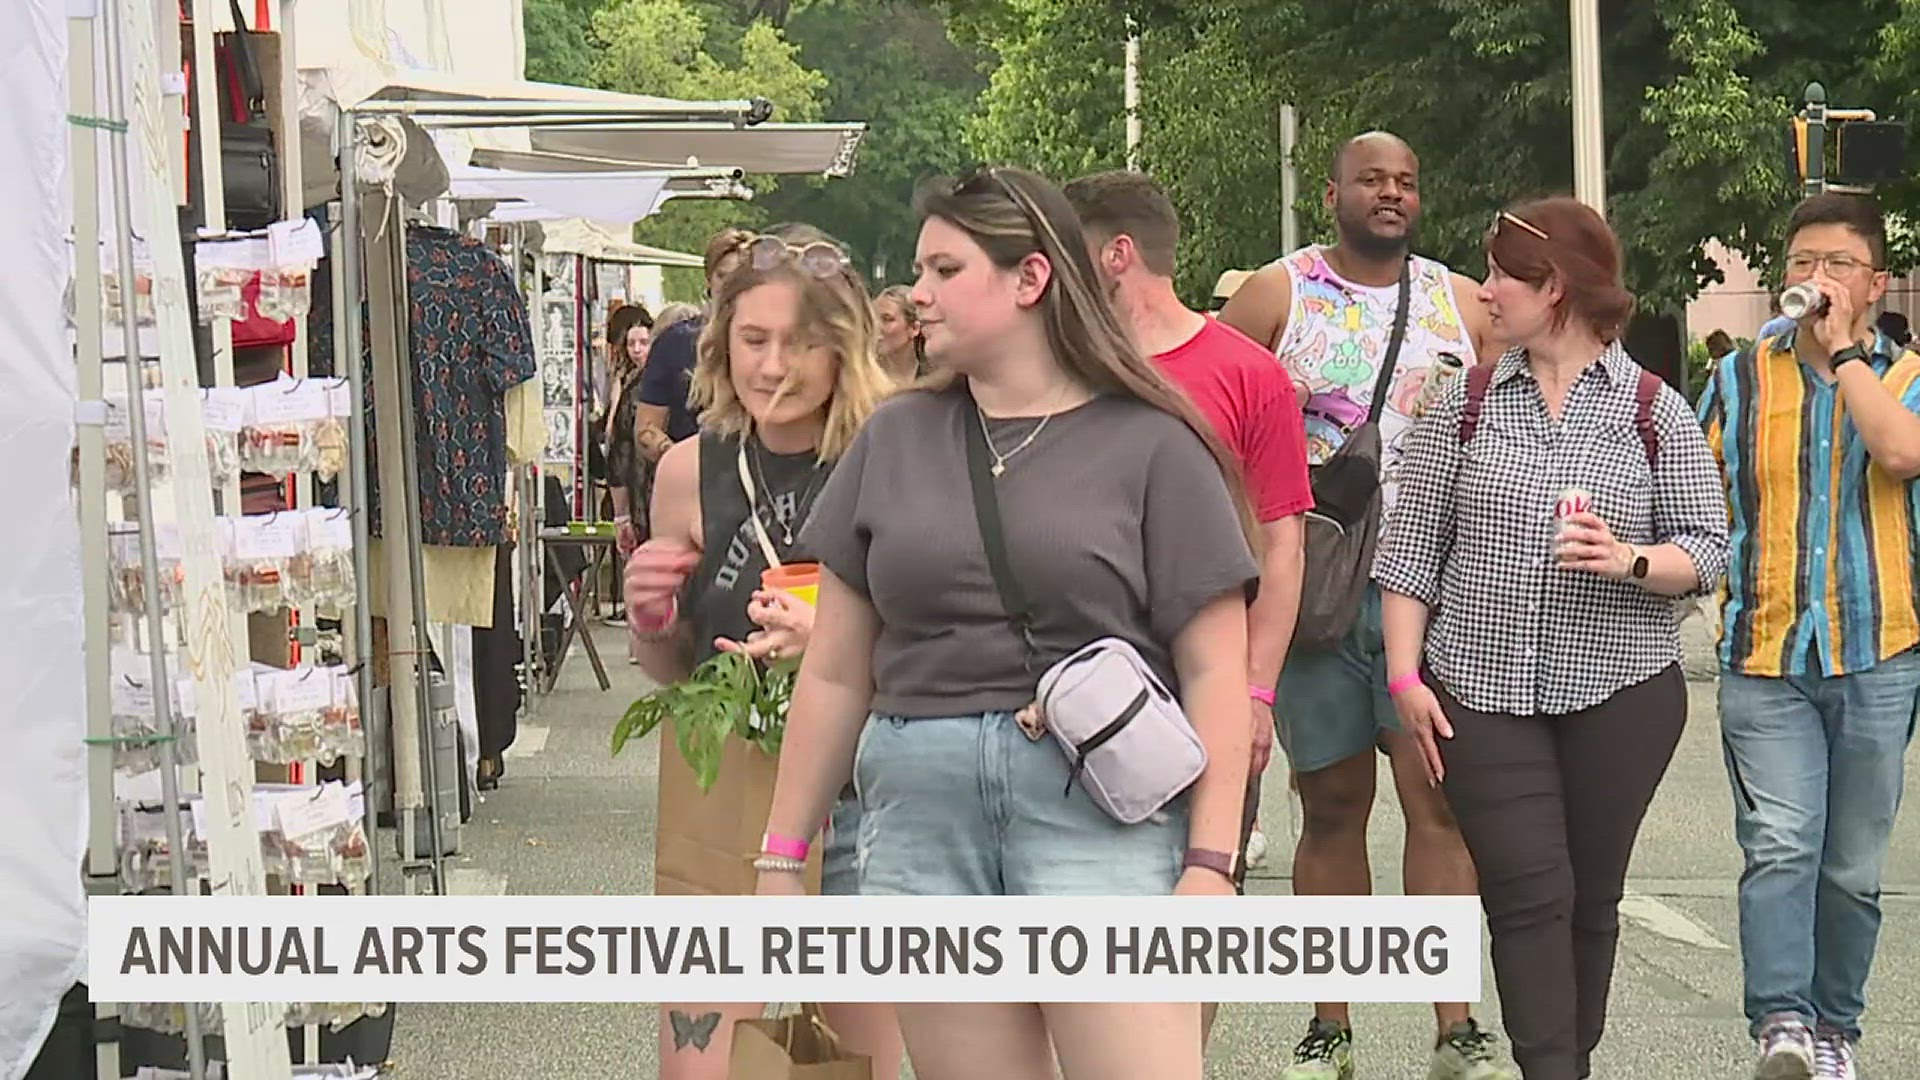 Harrisburg’s ArtsFest returned to riverfront park Saturday, kicking off a three-day weekend event.